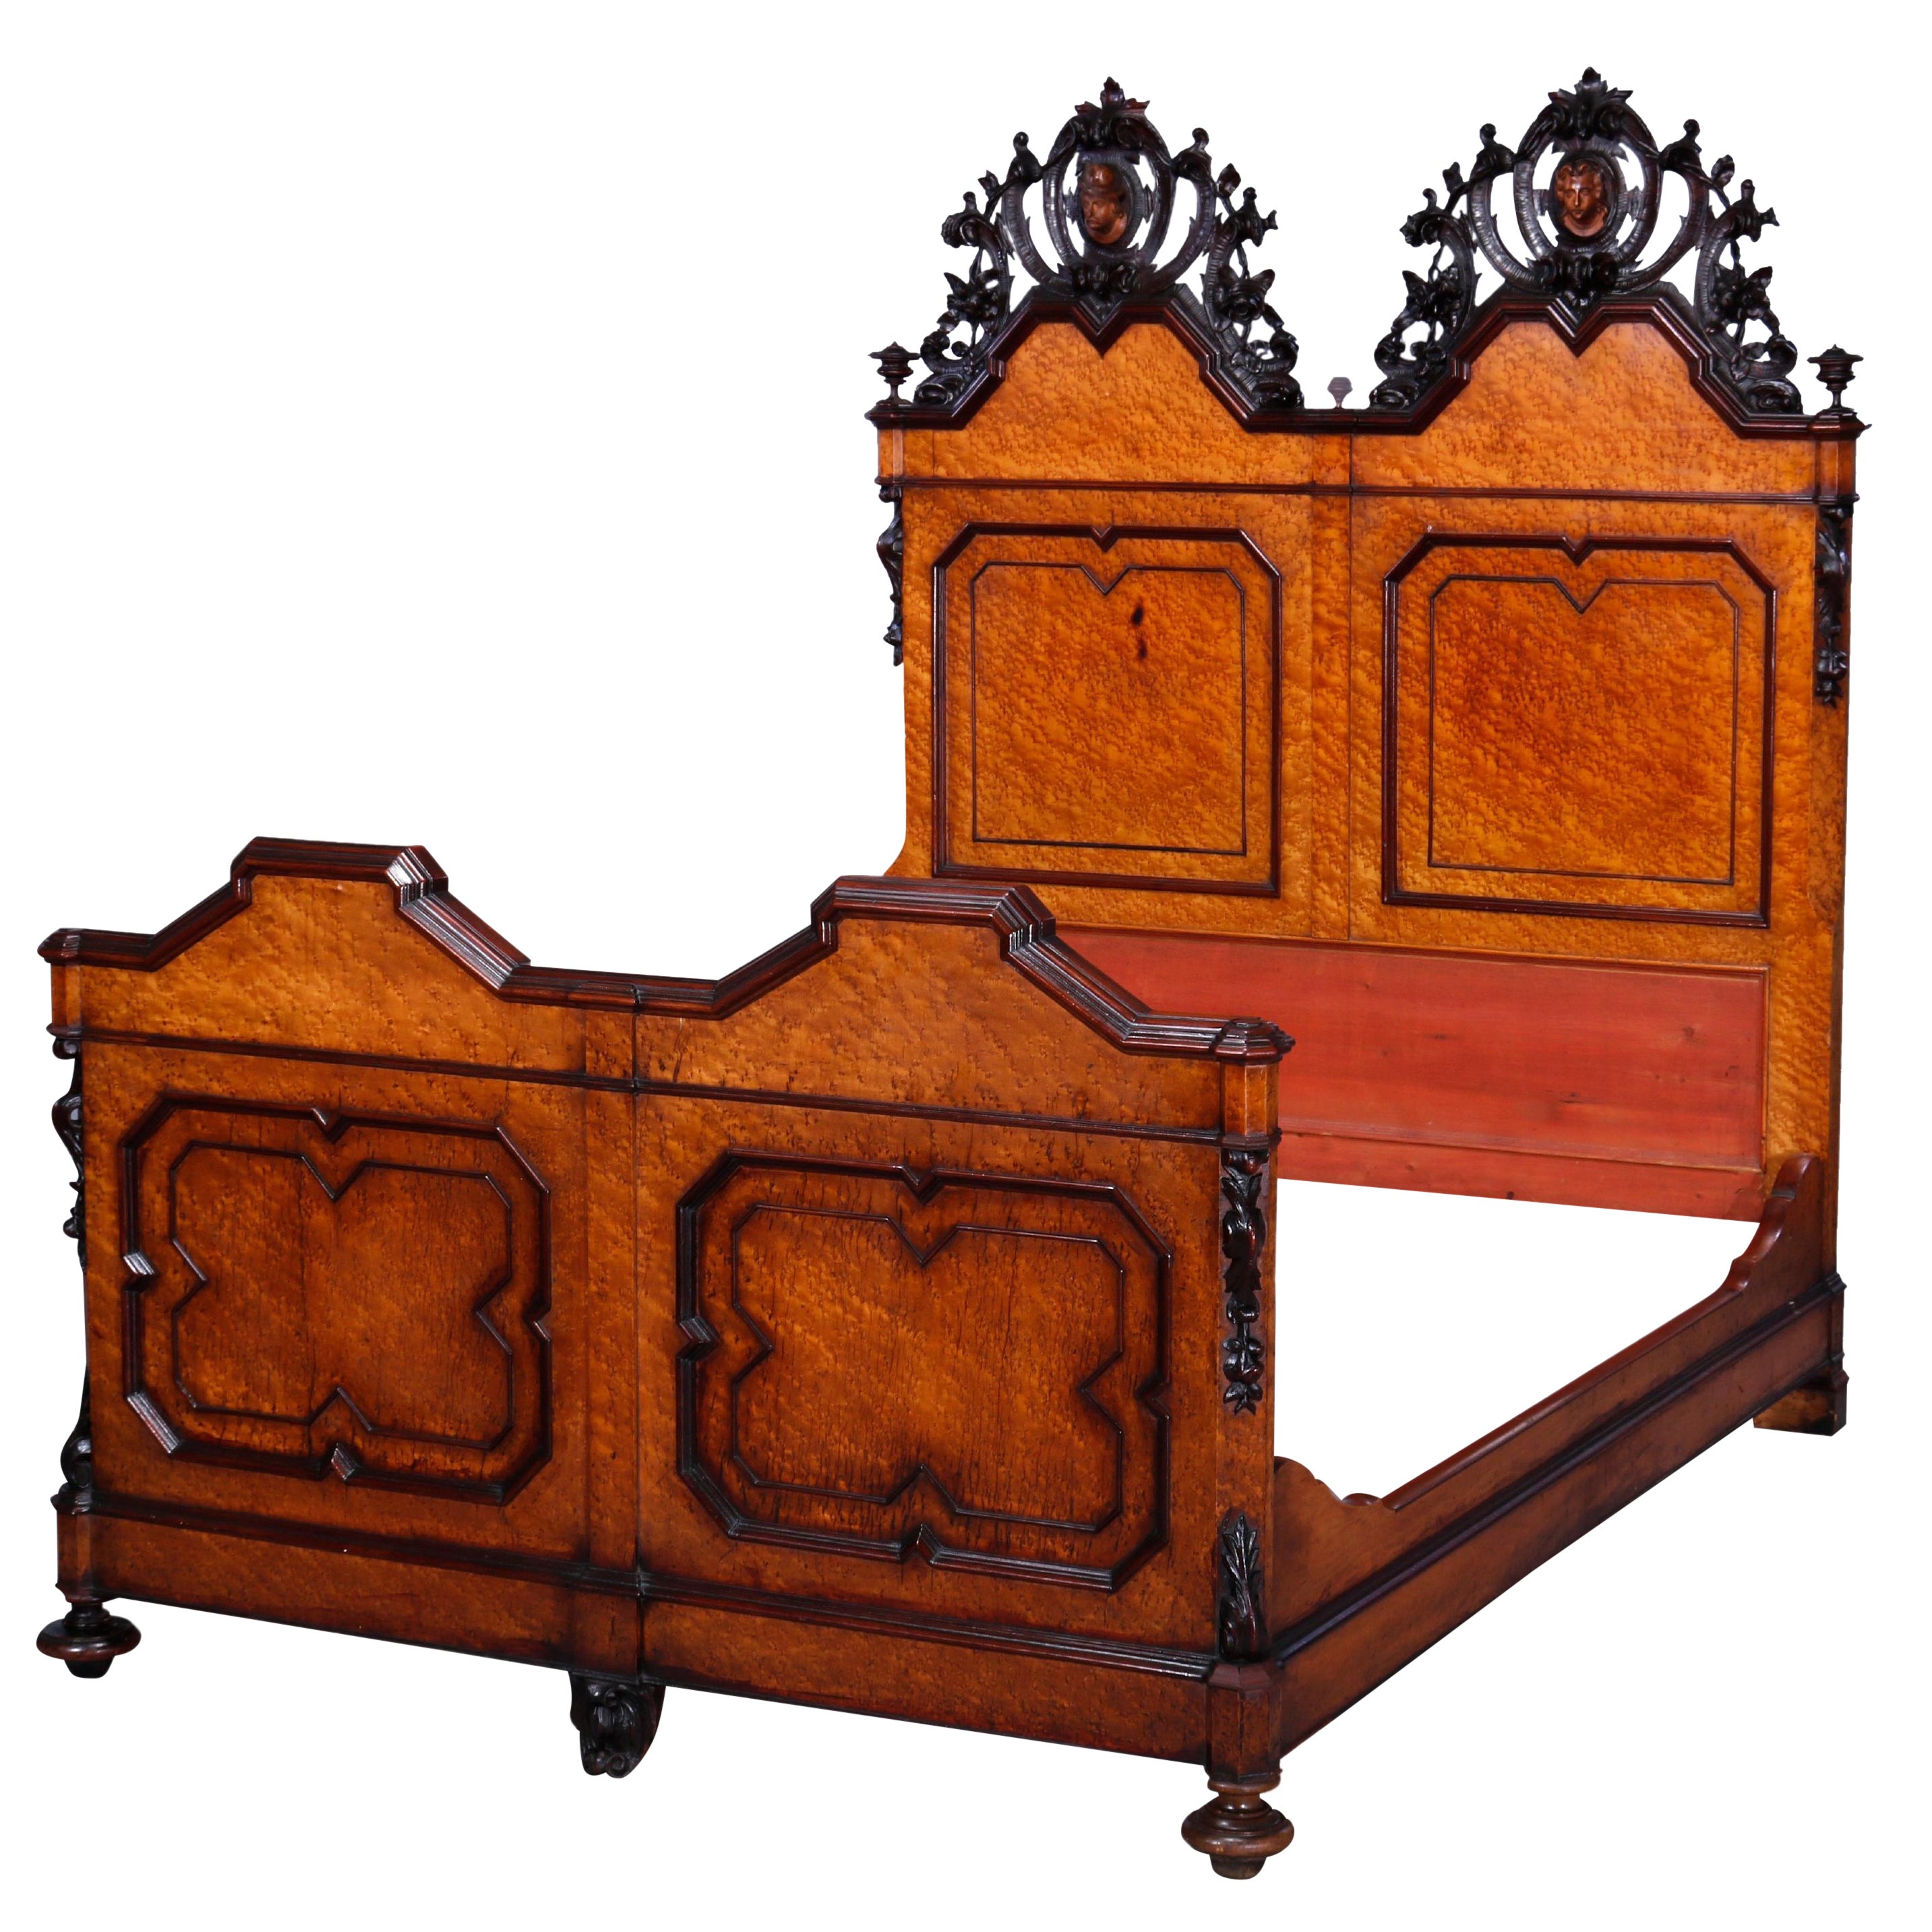 Antique Rococo Revival Birdseye Maple & Figural Carved Walnut Full Size Bed 1860